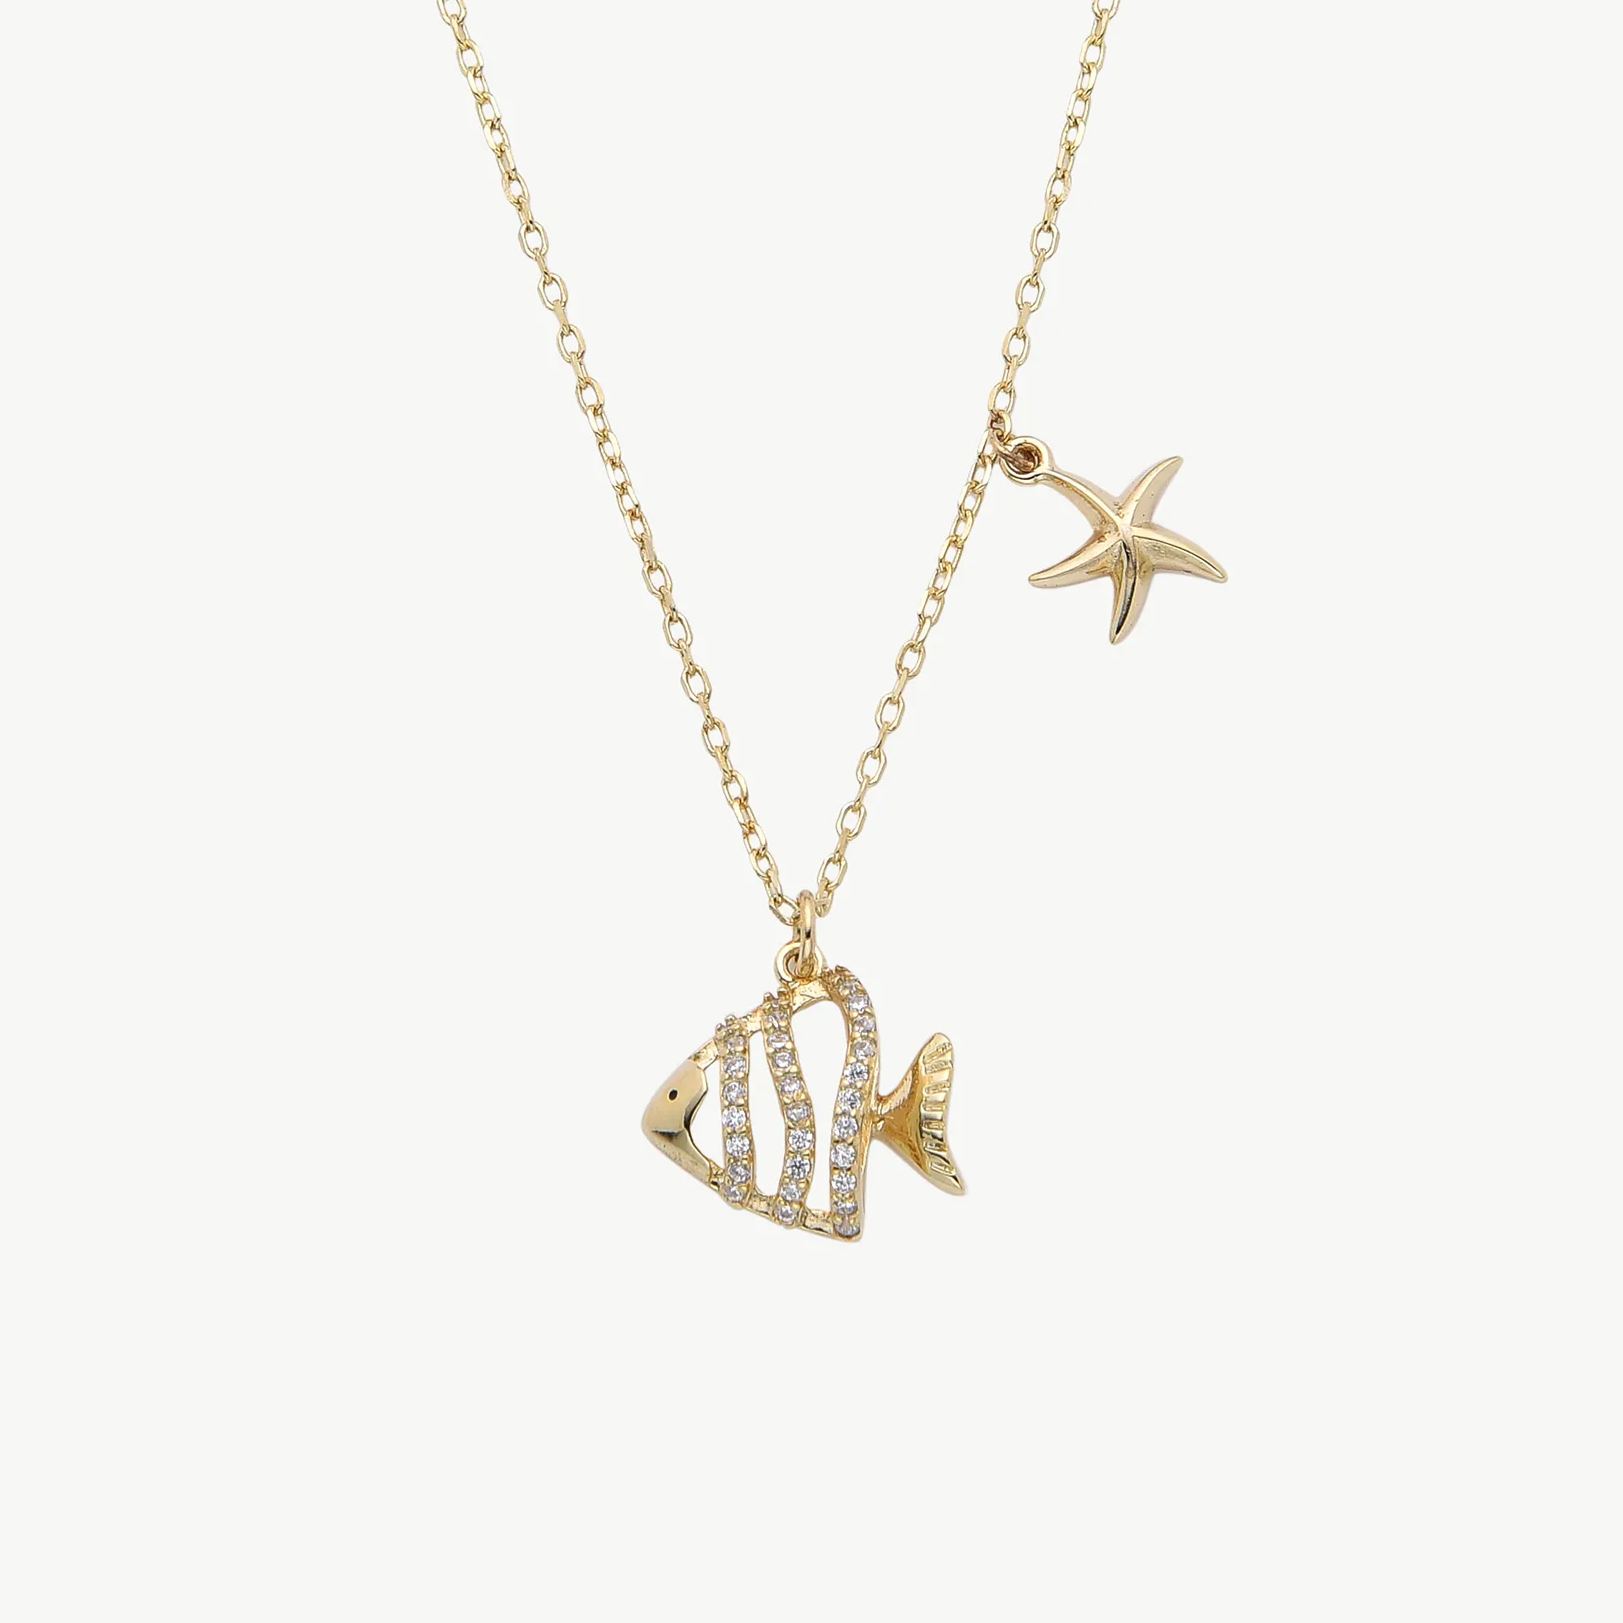 Pave Tropical Fish & Starfish Pendant Necklace